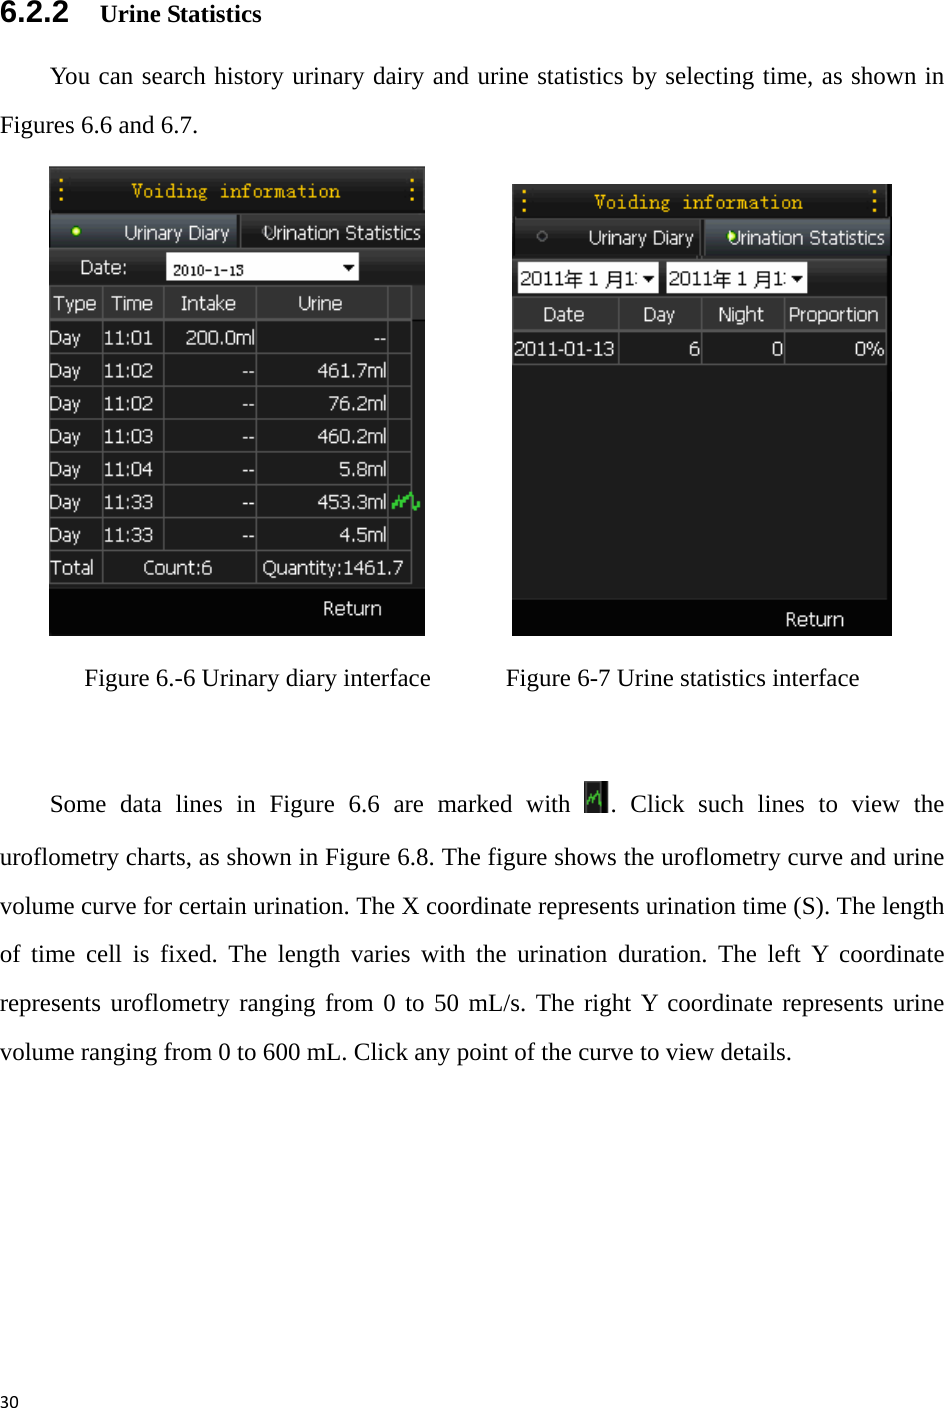 30 6.2.2   Urine Statistics You can search history urinary dairy and urine statistics by selecting time, as shown in Figures 6.6 and 6.7.            Figure 6.-6 Urinary diary interface            Figure 6-7 Urine statistics interface  Some data lines in Figure 6.6 are marked with  . Click such lines to view the uroflometry charts, as shown in Figure 6.8. The figure shows the uroflometry curve and urine volume curve for certain urination. The X coordinate represents urination time (S). The length of time cell is fixed. The length varies with the urination duration. The left Y coordinate represents uroflometry ranging from 0 to 50 mL/s. The right Y coordinate represents urine volume ranging from 0 to 600 mL. Click any point of the curve to view details. 